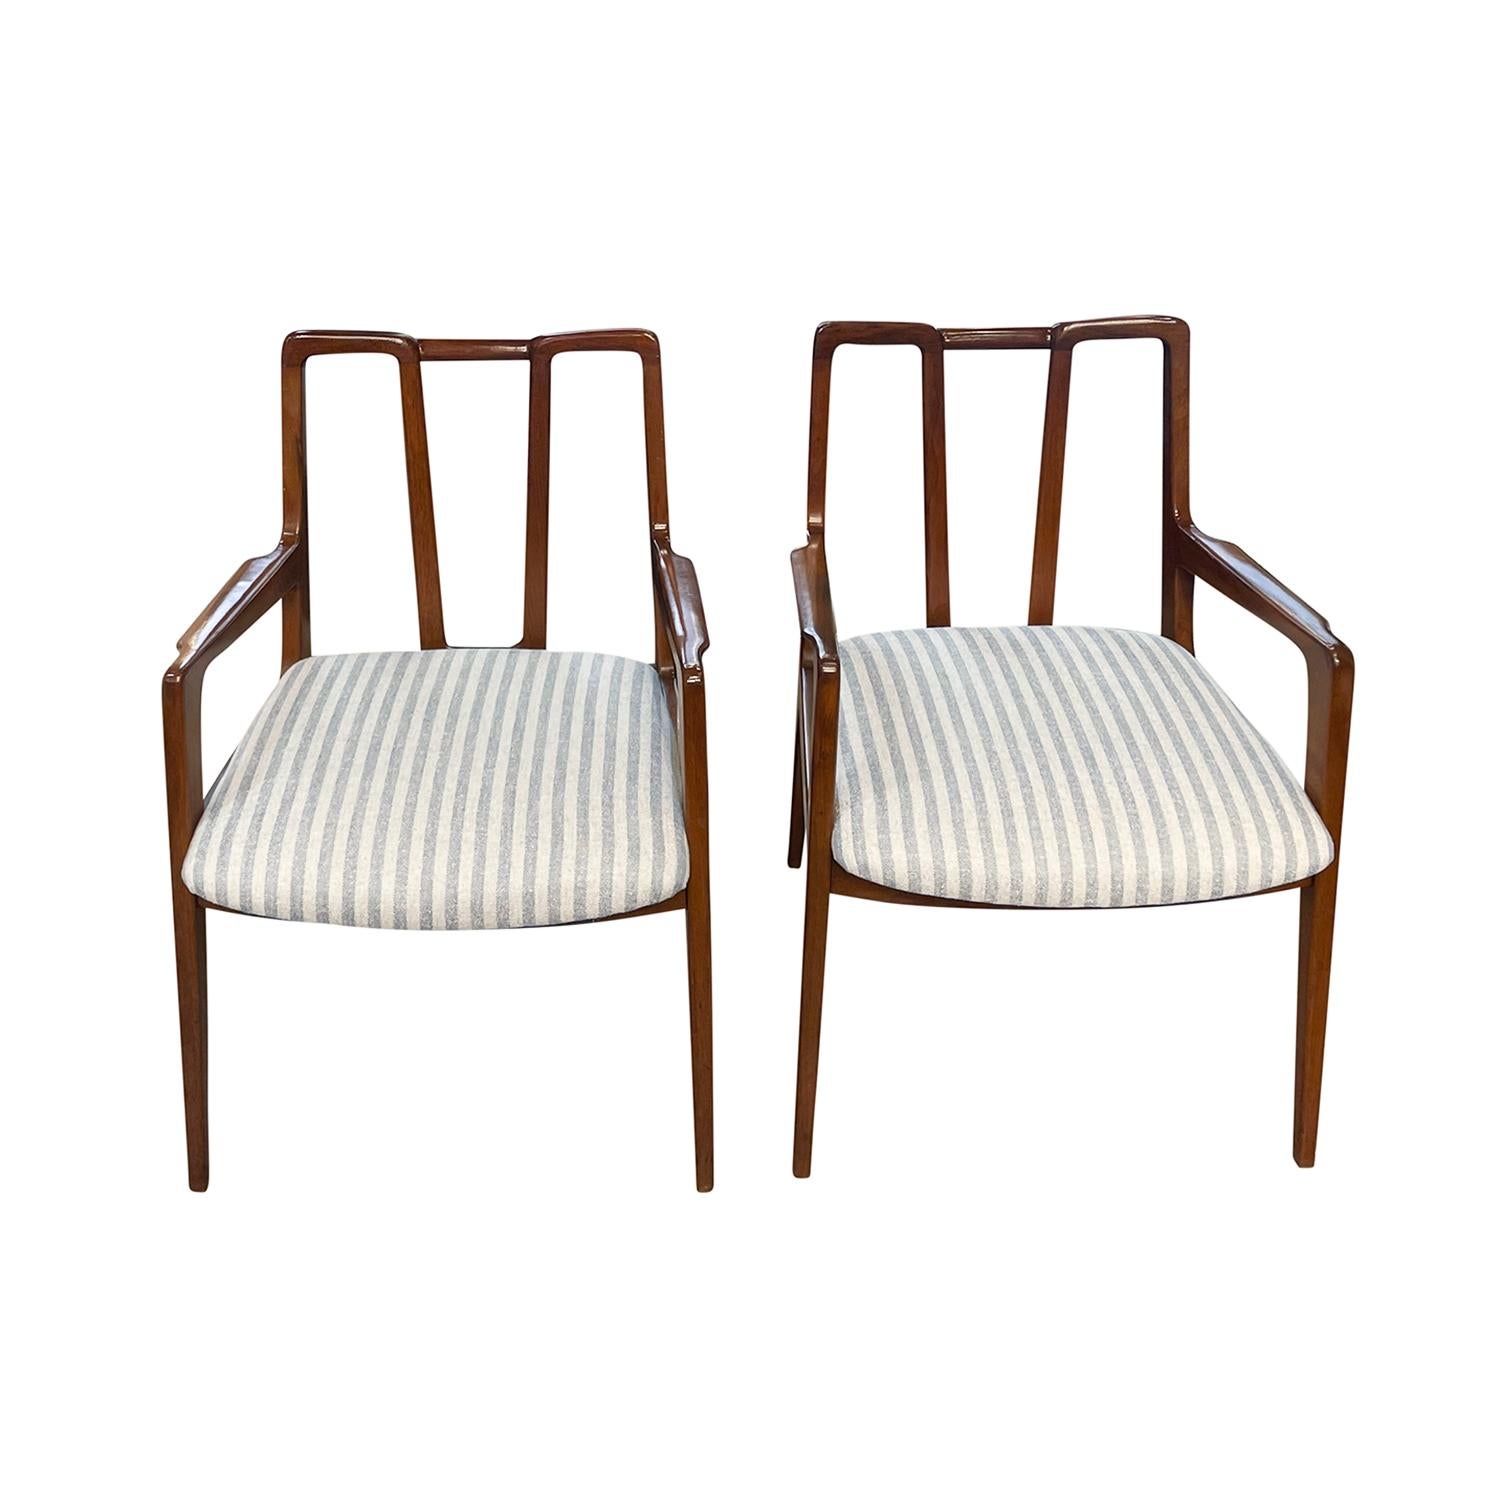 Mid-Century Modern 20th Century American Pair of Walnut Armchairs - Dining Chairs by John Stuart For Sale